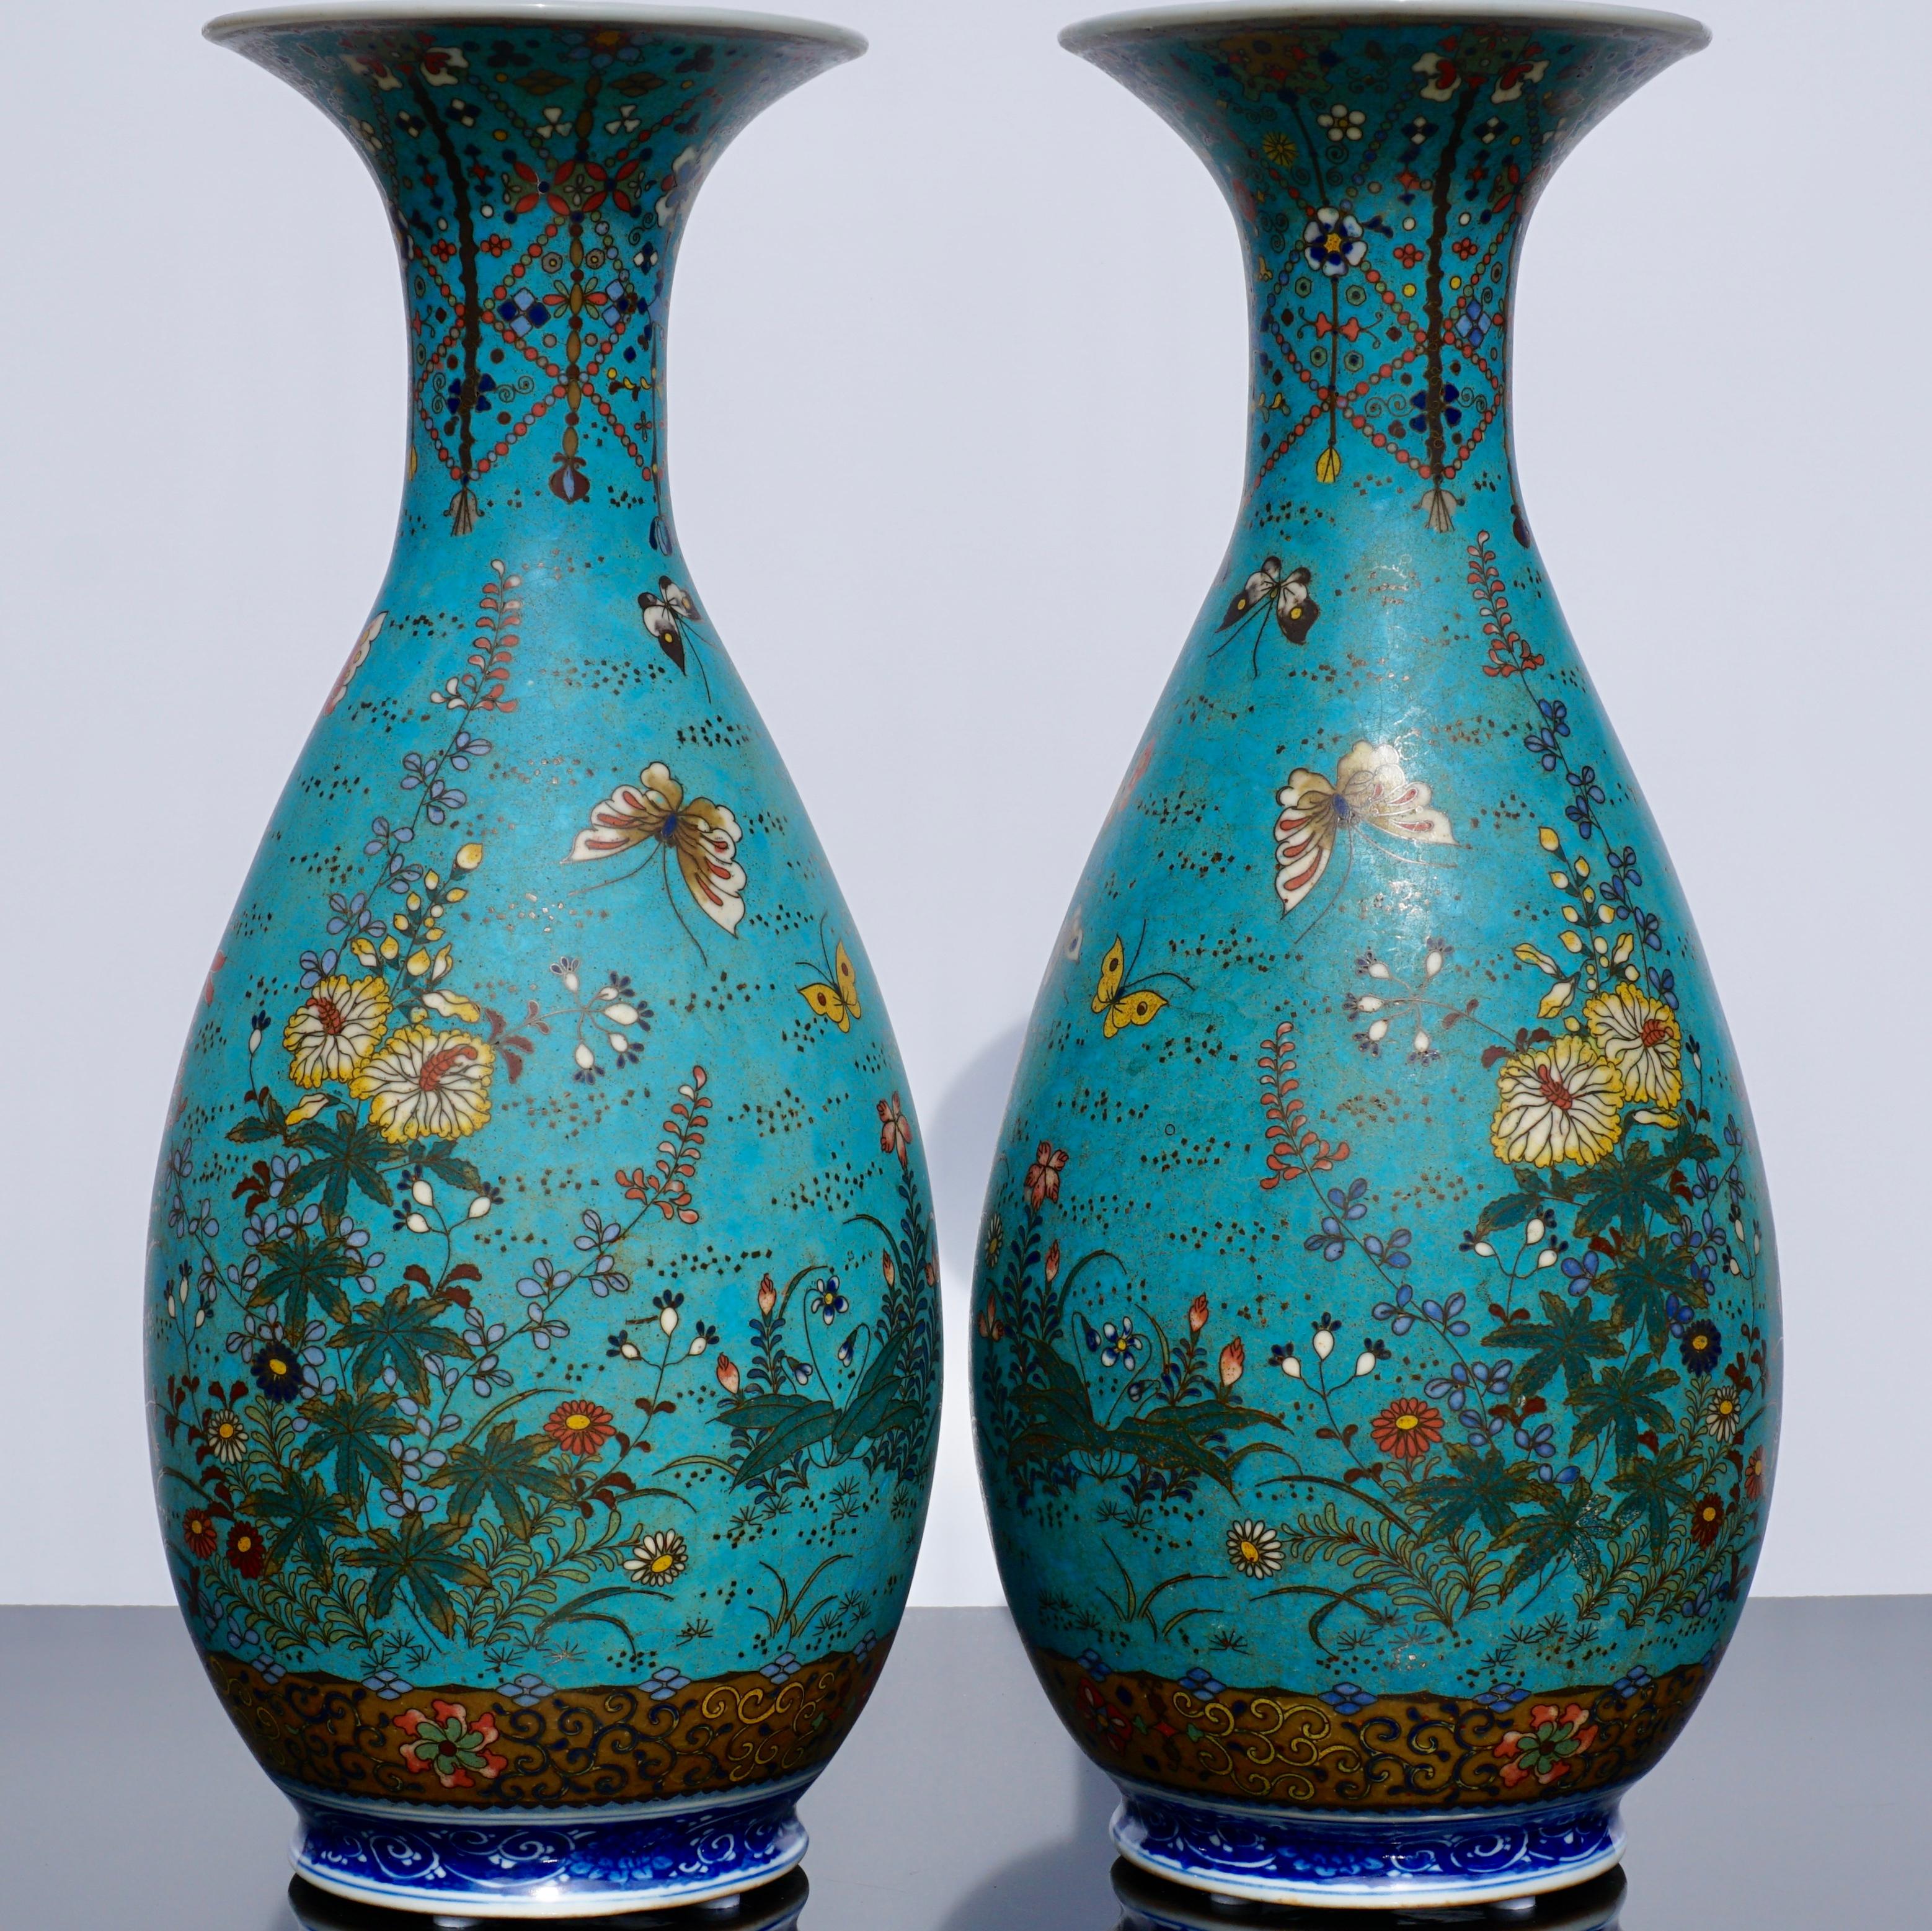 A rare pair of silver wire cloisonné enameled porcelain vases

Signed Dainihon Seizo Shippo Gaisha Kojin Takeuchi Chubei, Meiji period (late 19th century)

Each of bulbous form with tall everted neck, the porcelain body over-enamelled in various